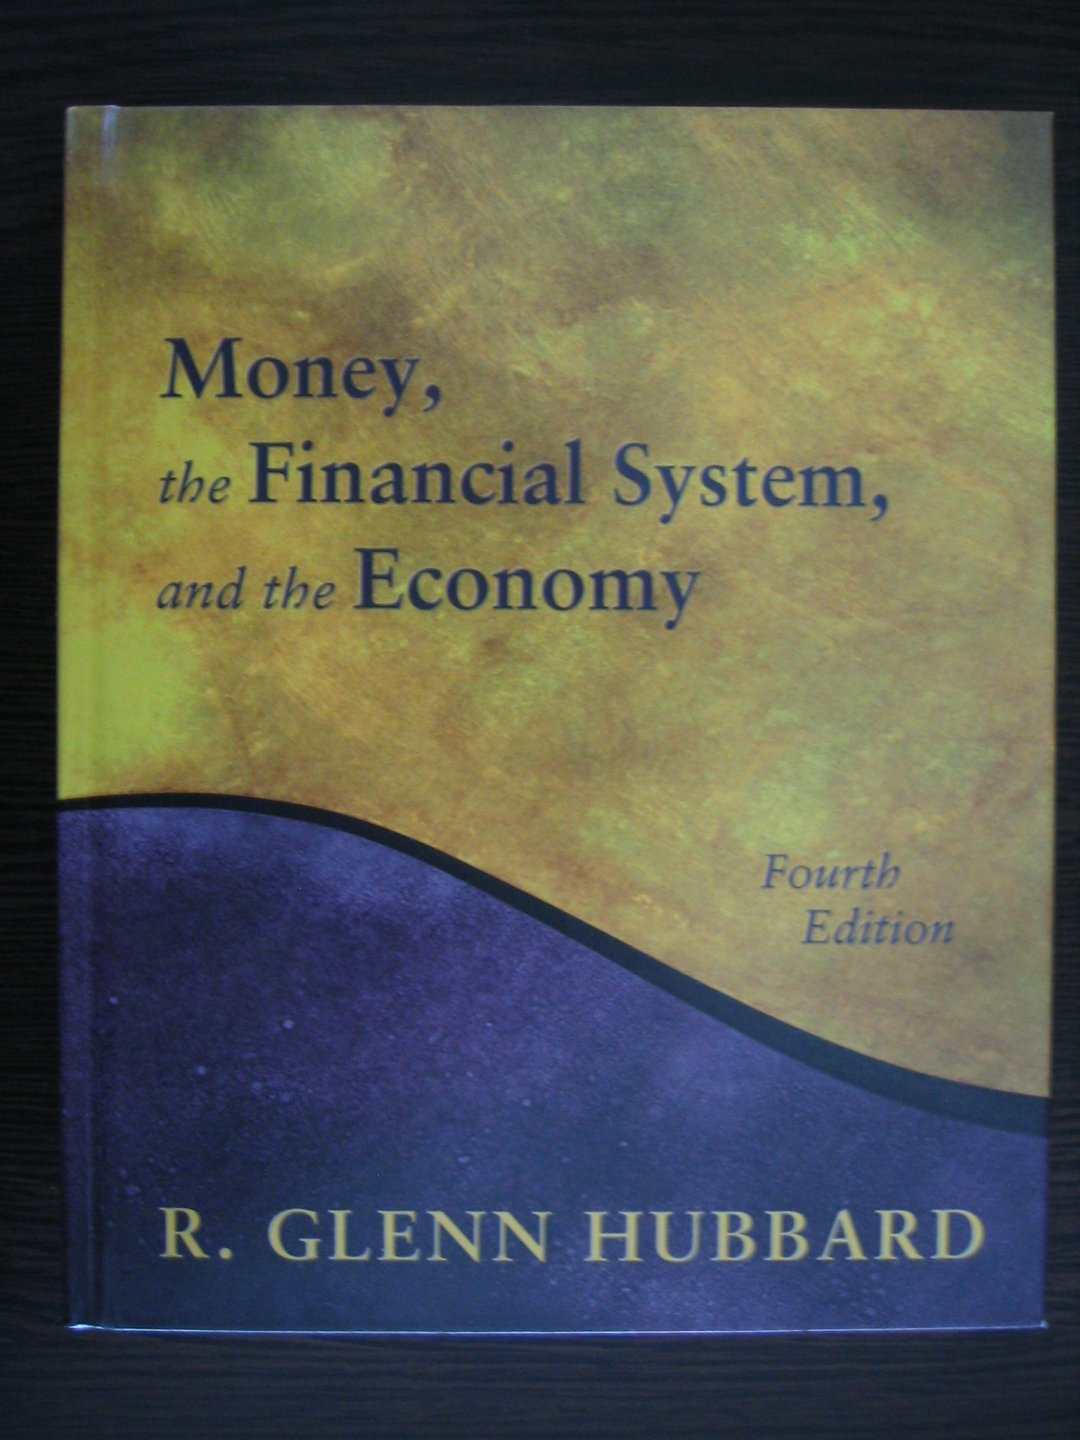 Hubbard, R. Glenn - Money, the financial system and the economy.